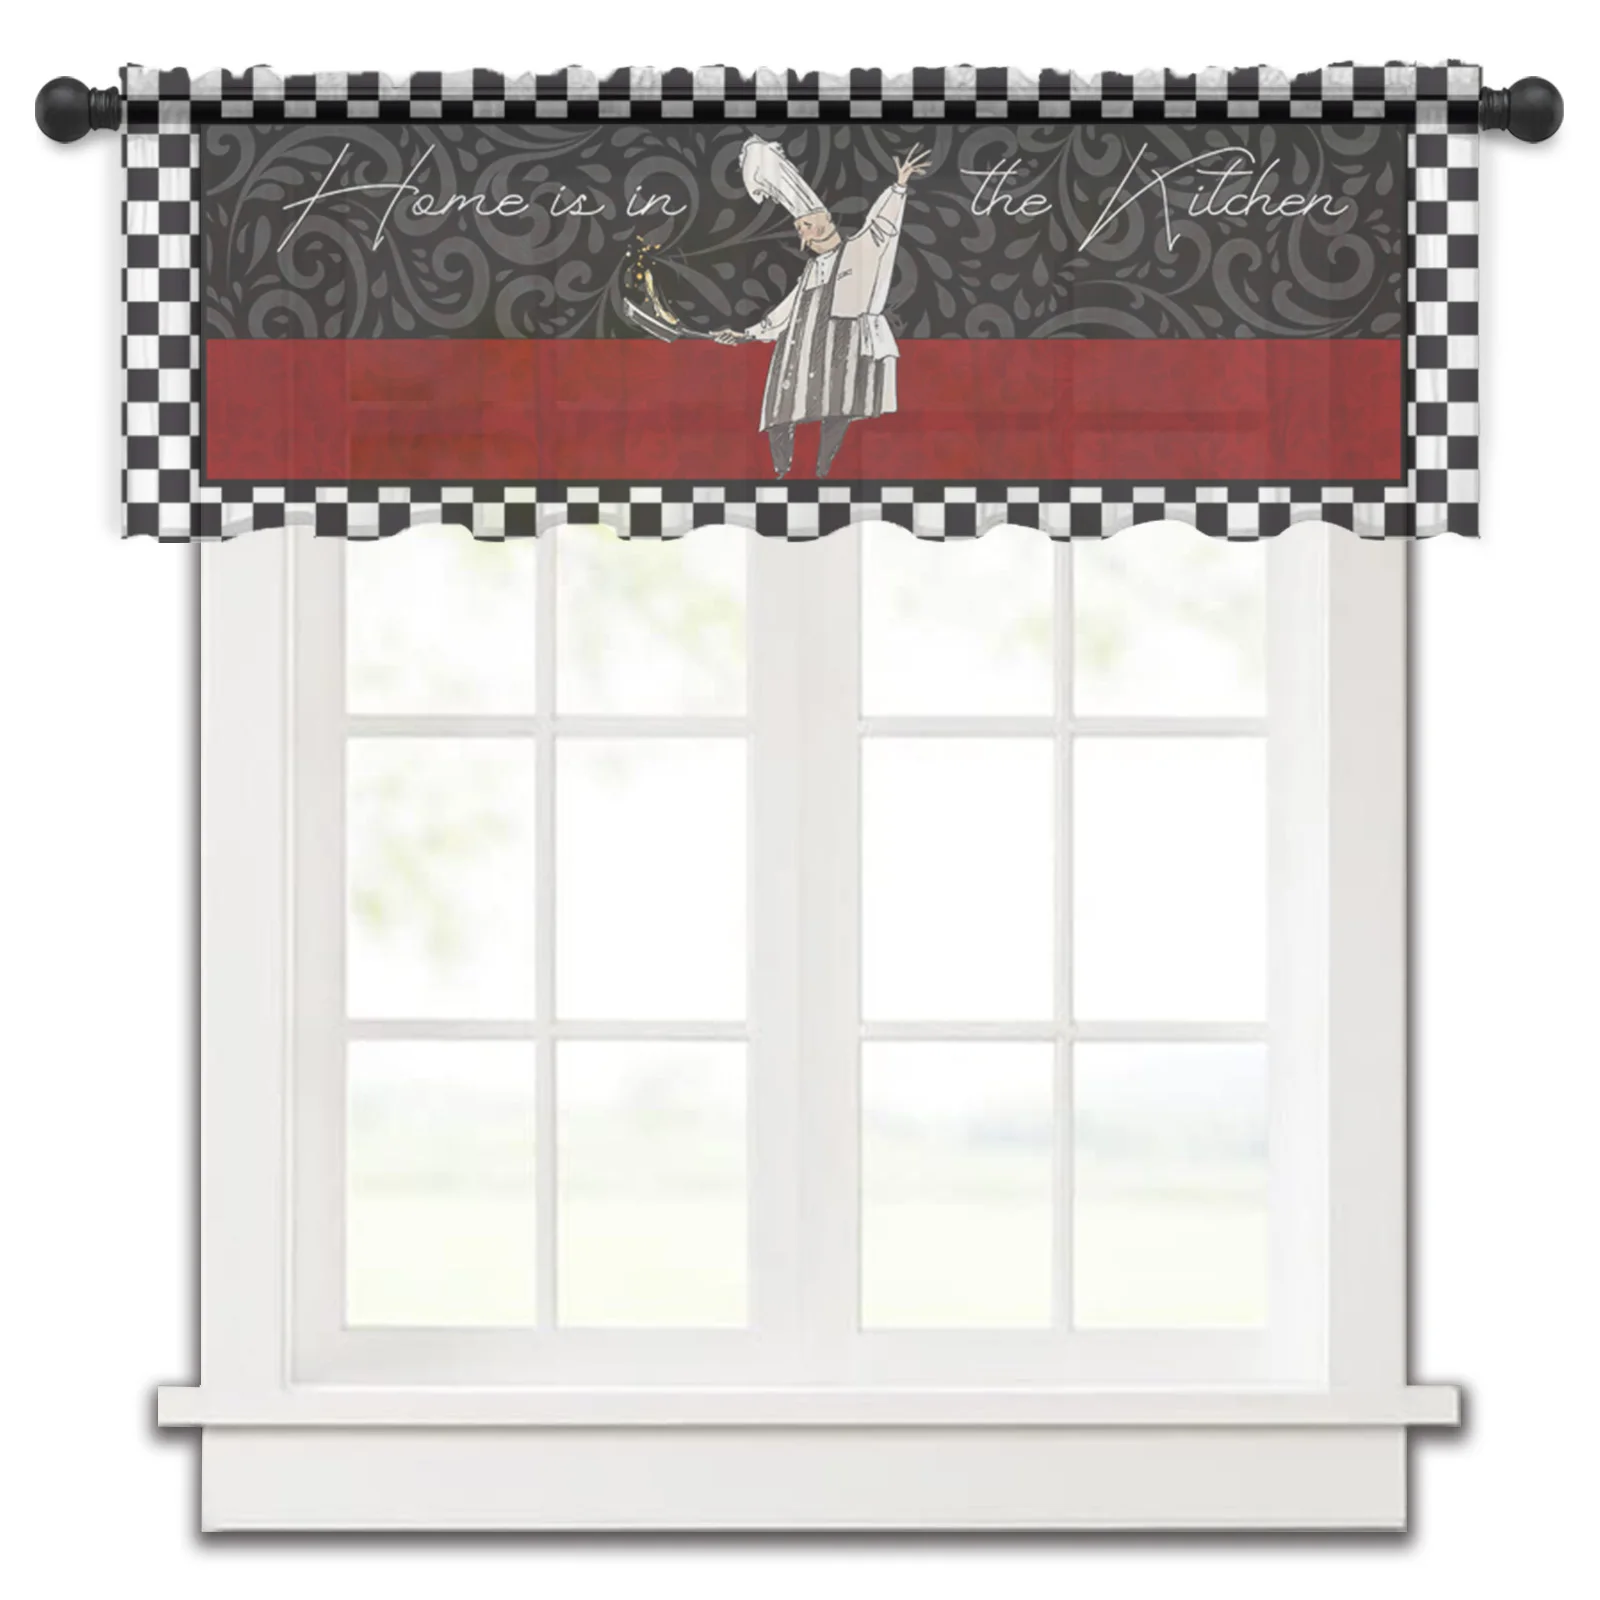 

Black Checkered Kitchen Food Retro Kitchen Small Curtain Tulle Sheer Short Curtain Bedroom Living Room Home Decor Voile Drapes